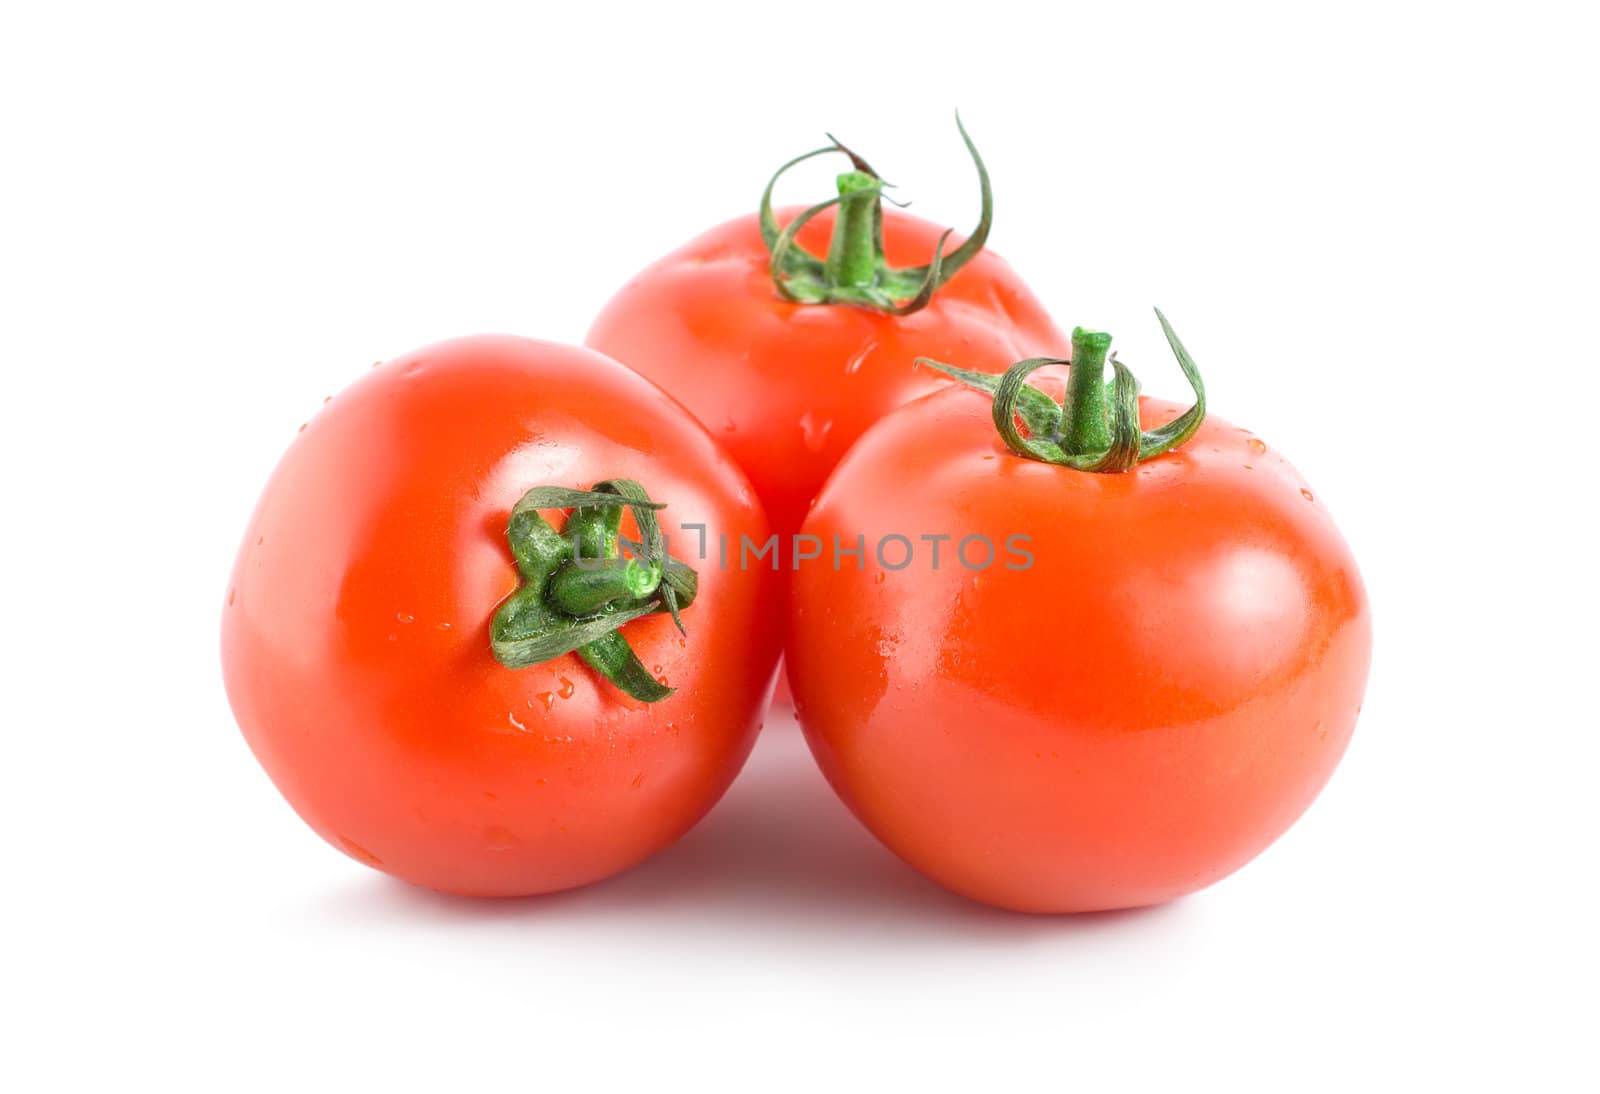 Three red tomatoes isolated on white background